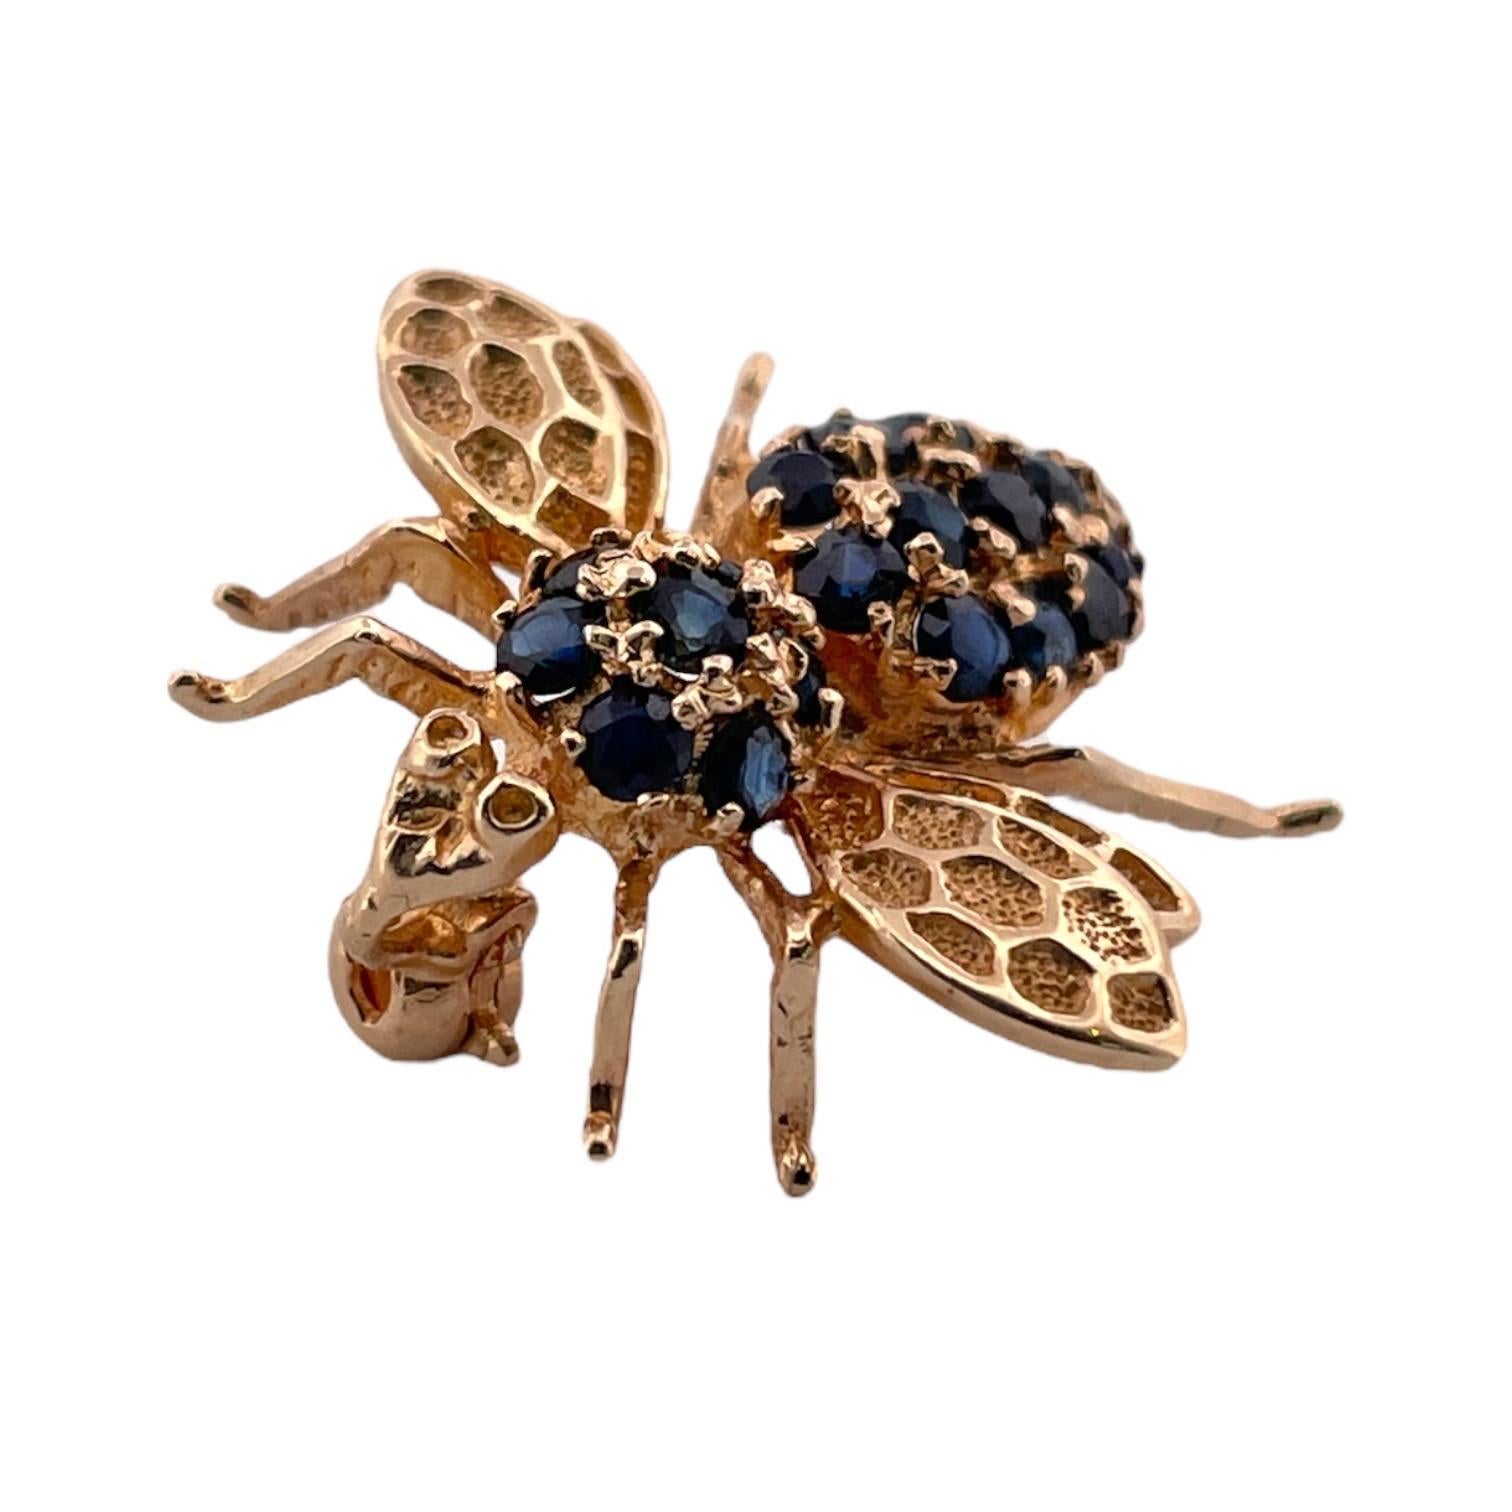 Experience the charm of yesteryear with this vintage bee brooch, crafted in 14K yellow gold and adorned with sapphires totaling 1.00 Total carat weight. Weighing 2.76 grams, it's a whimsical yet elegant nod to nature's artistry, perfect for any